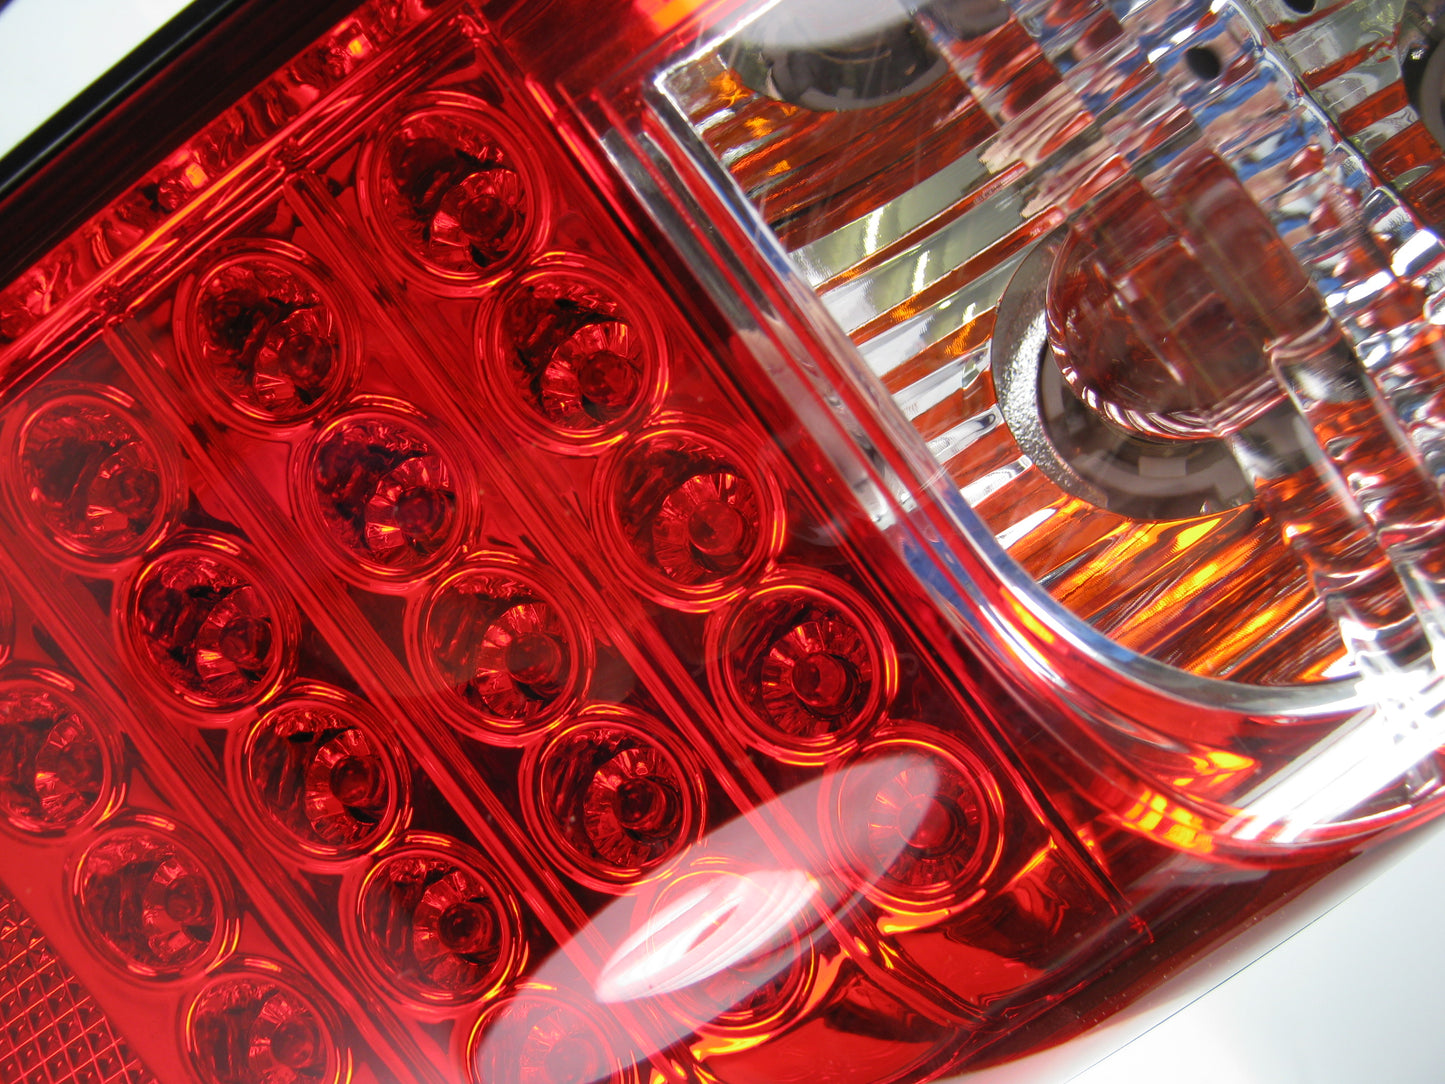 Rear Lights (pair) - LED Style - Toyota Hilux Mk4/5